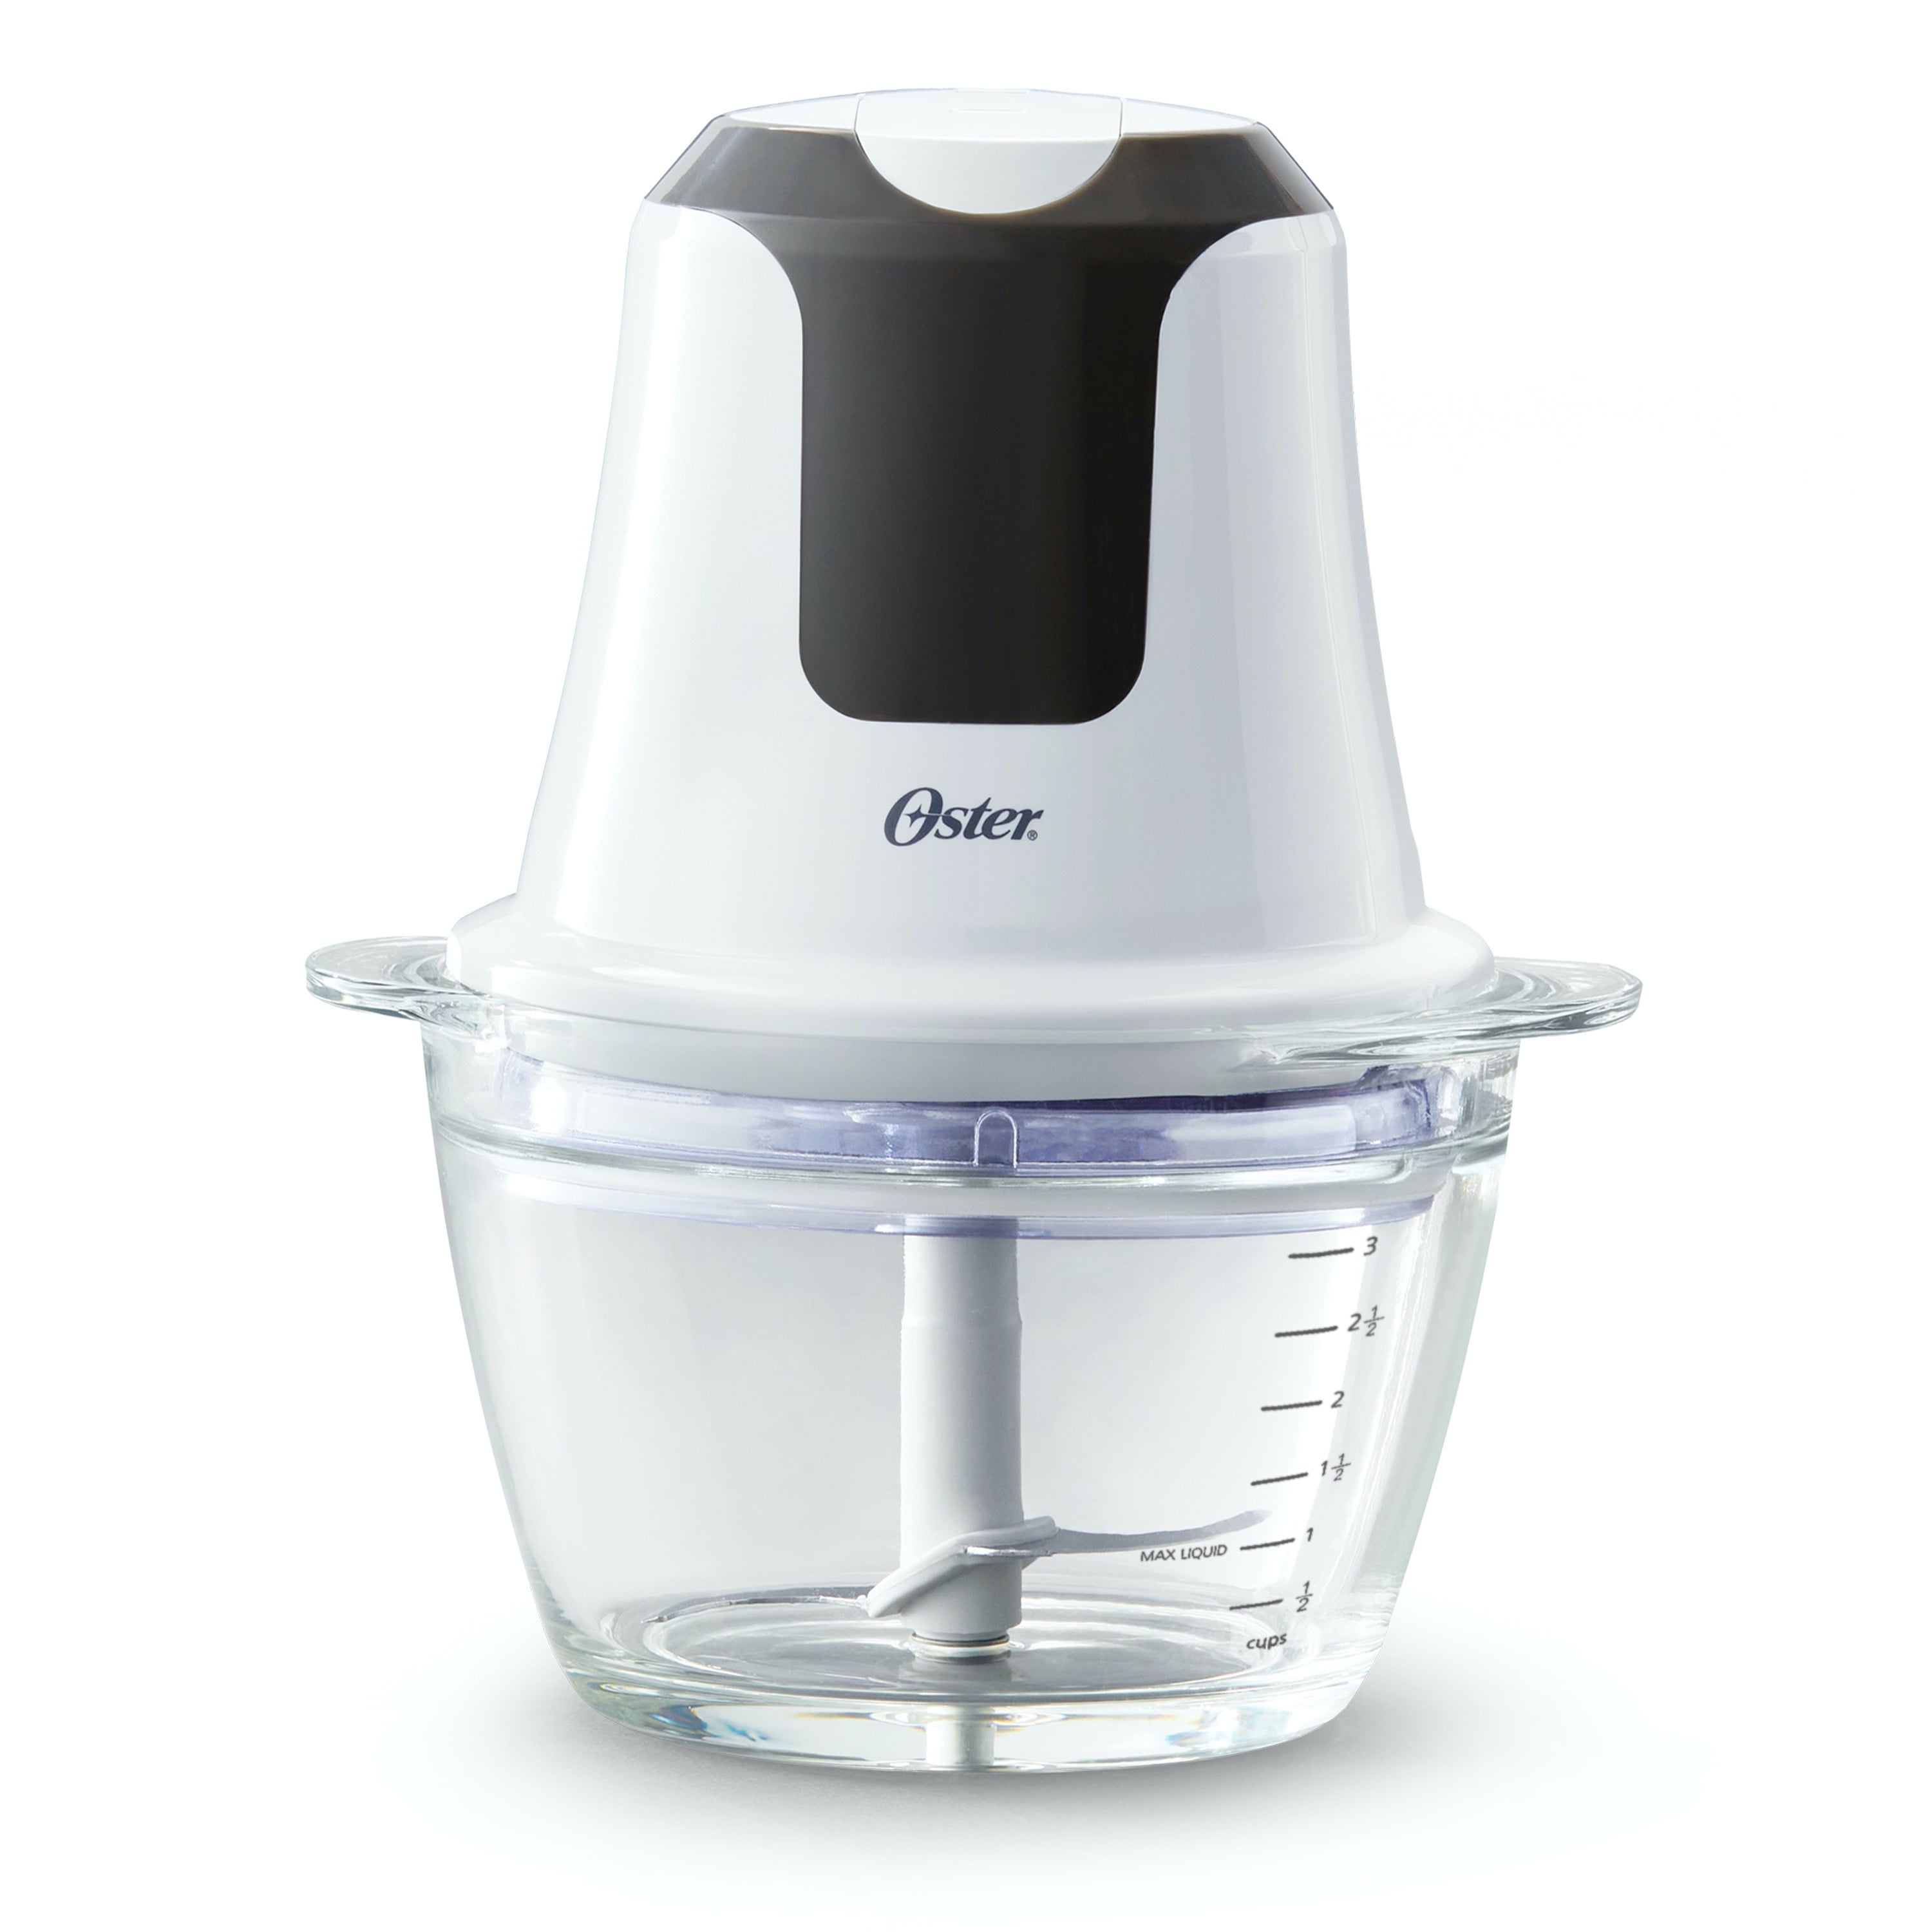 Oster 3-Cup Mini Food Chopper with Tempered Glass Bowl